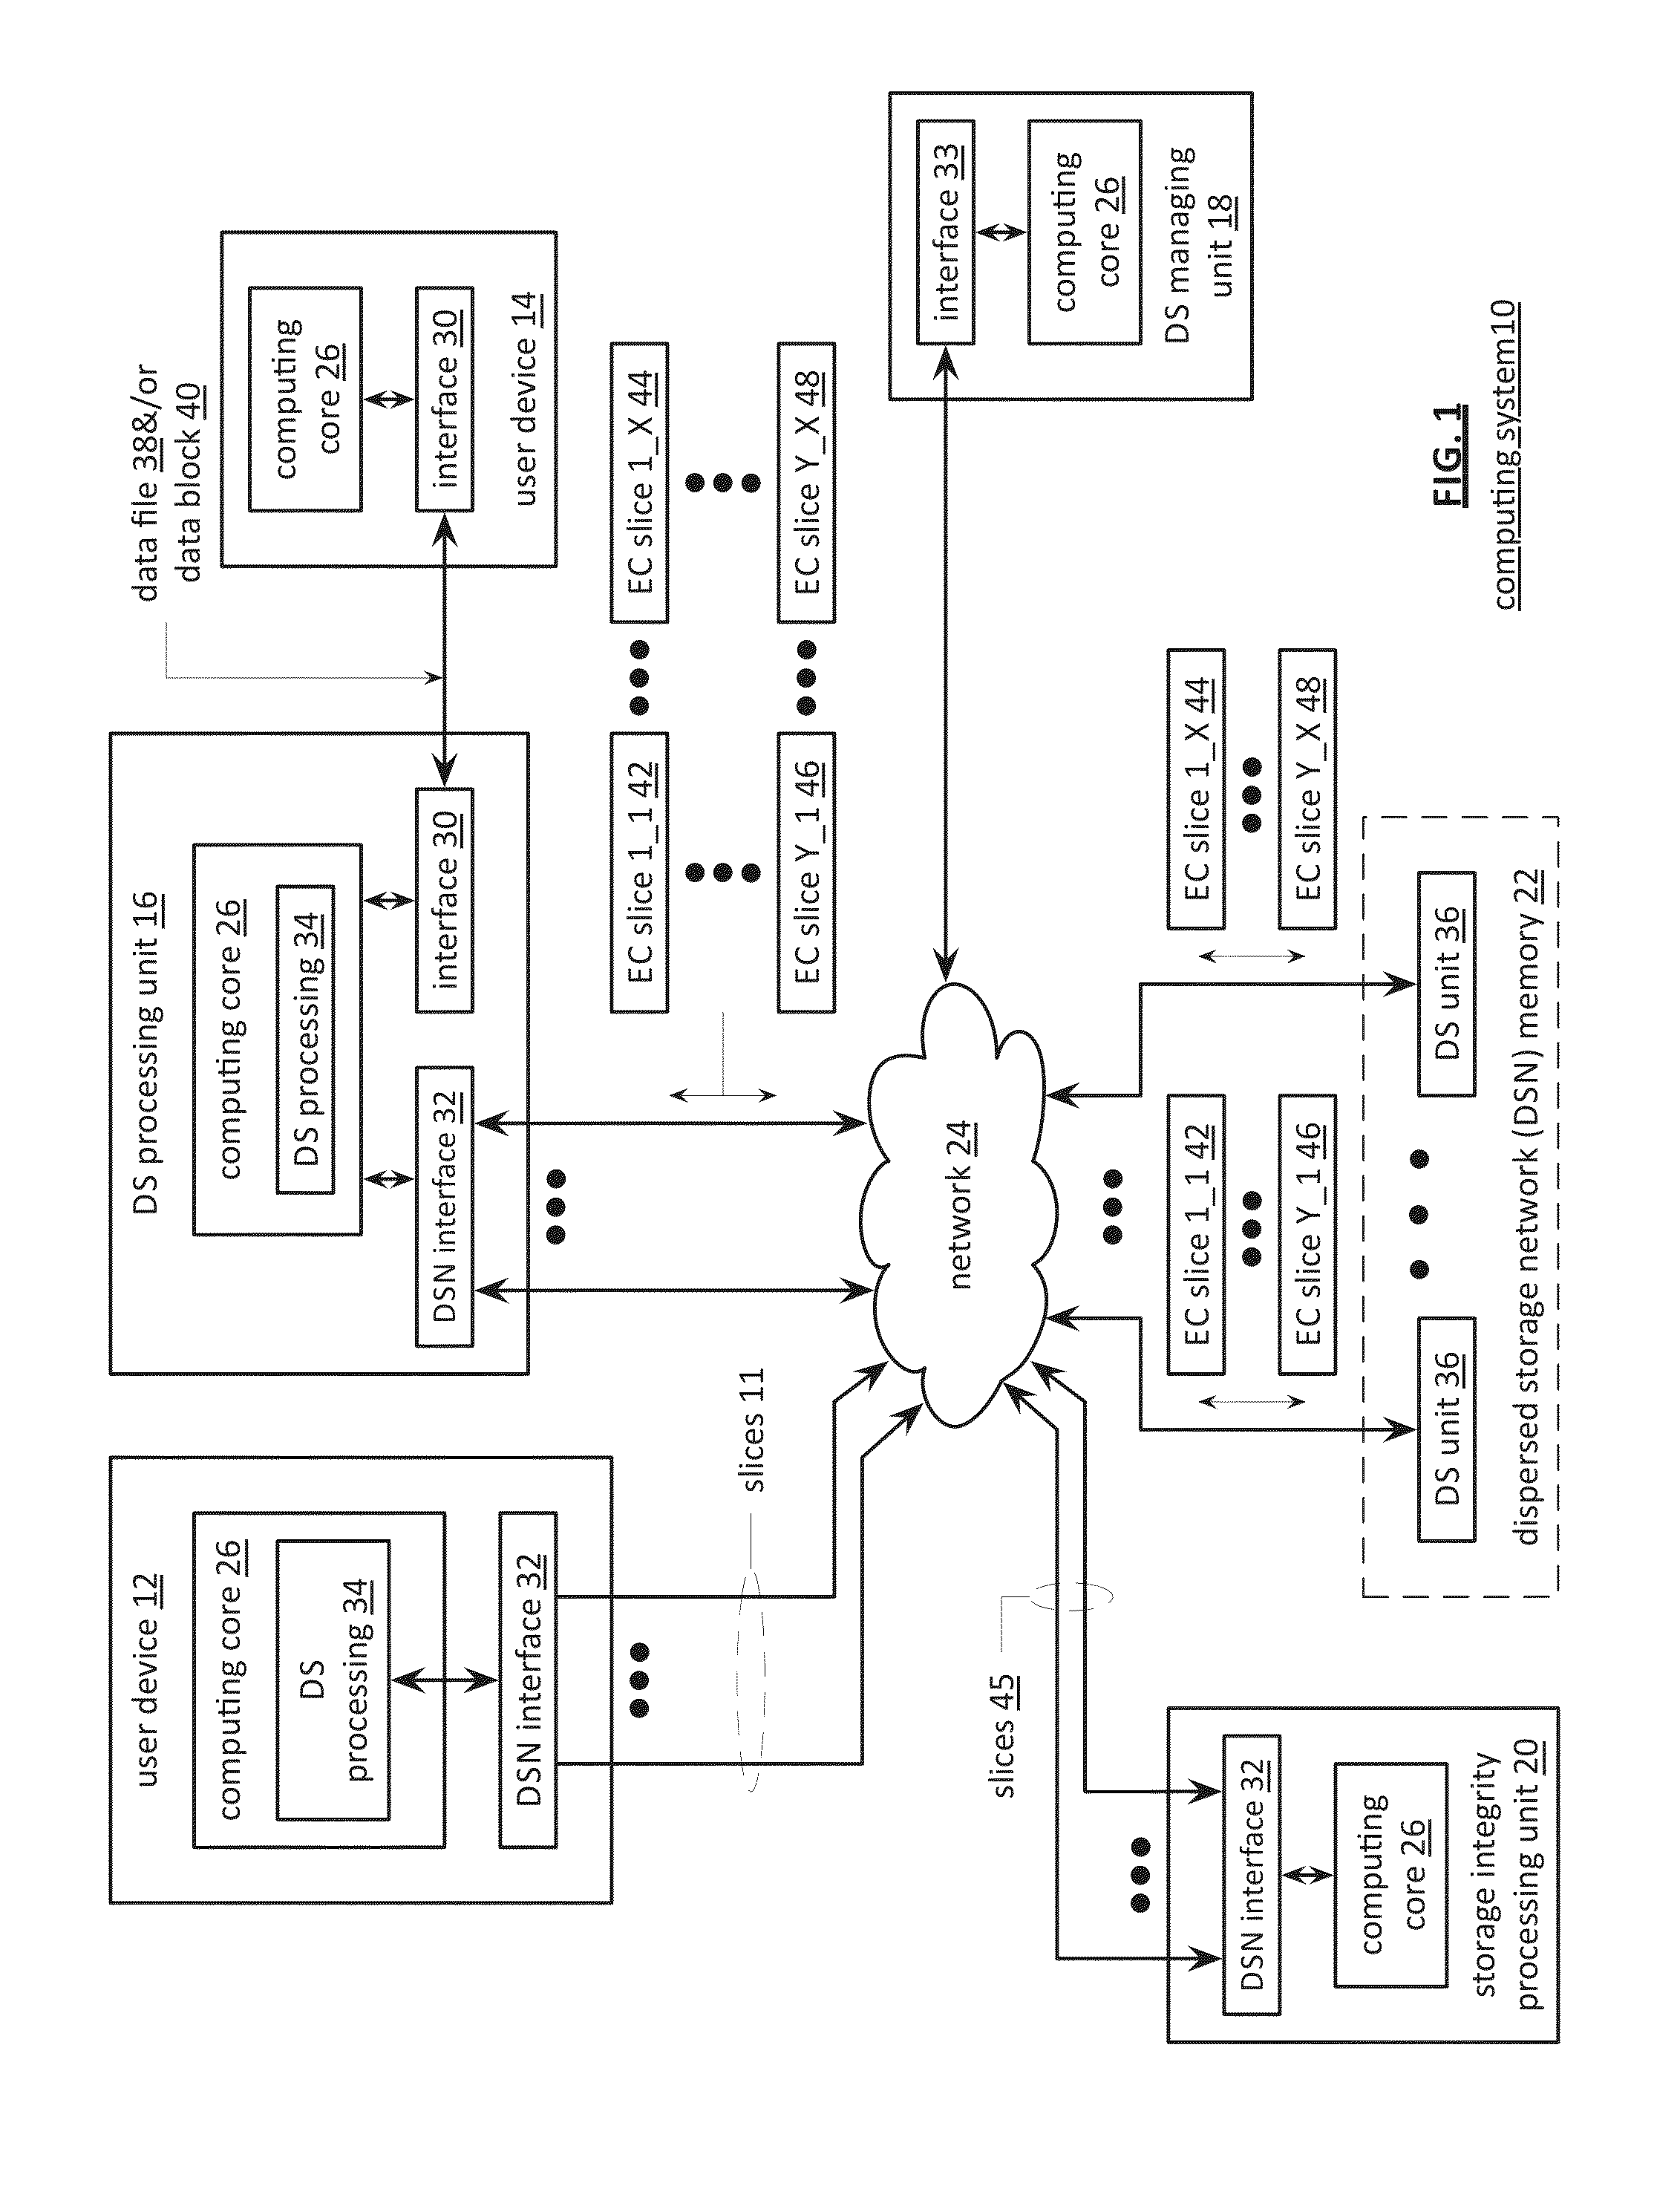 Transferring Encoded Data Slices in a Distributed Storage Network